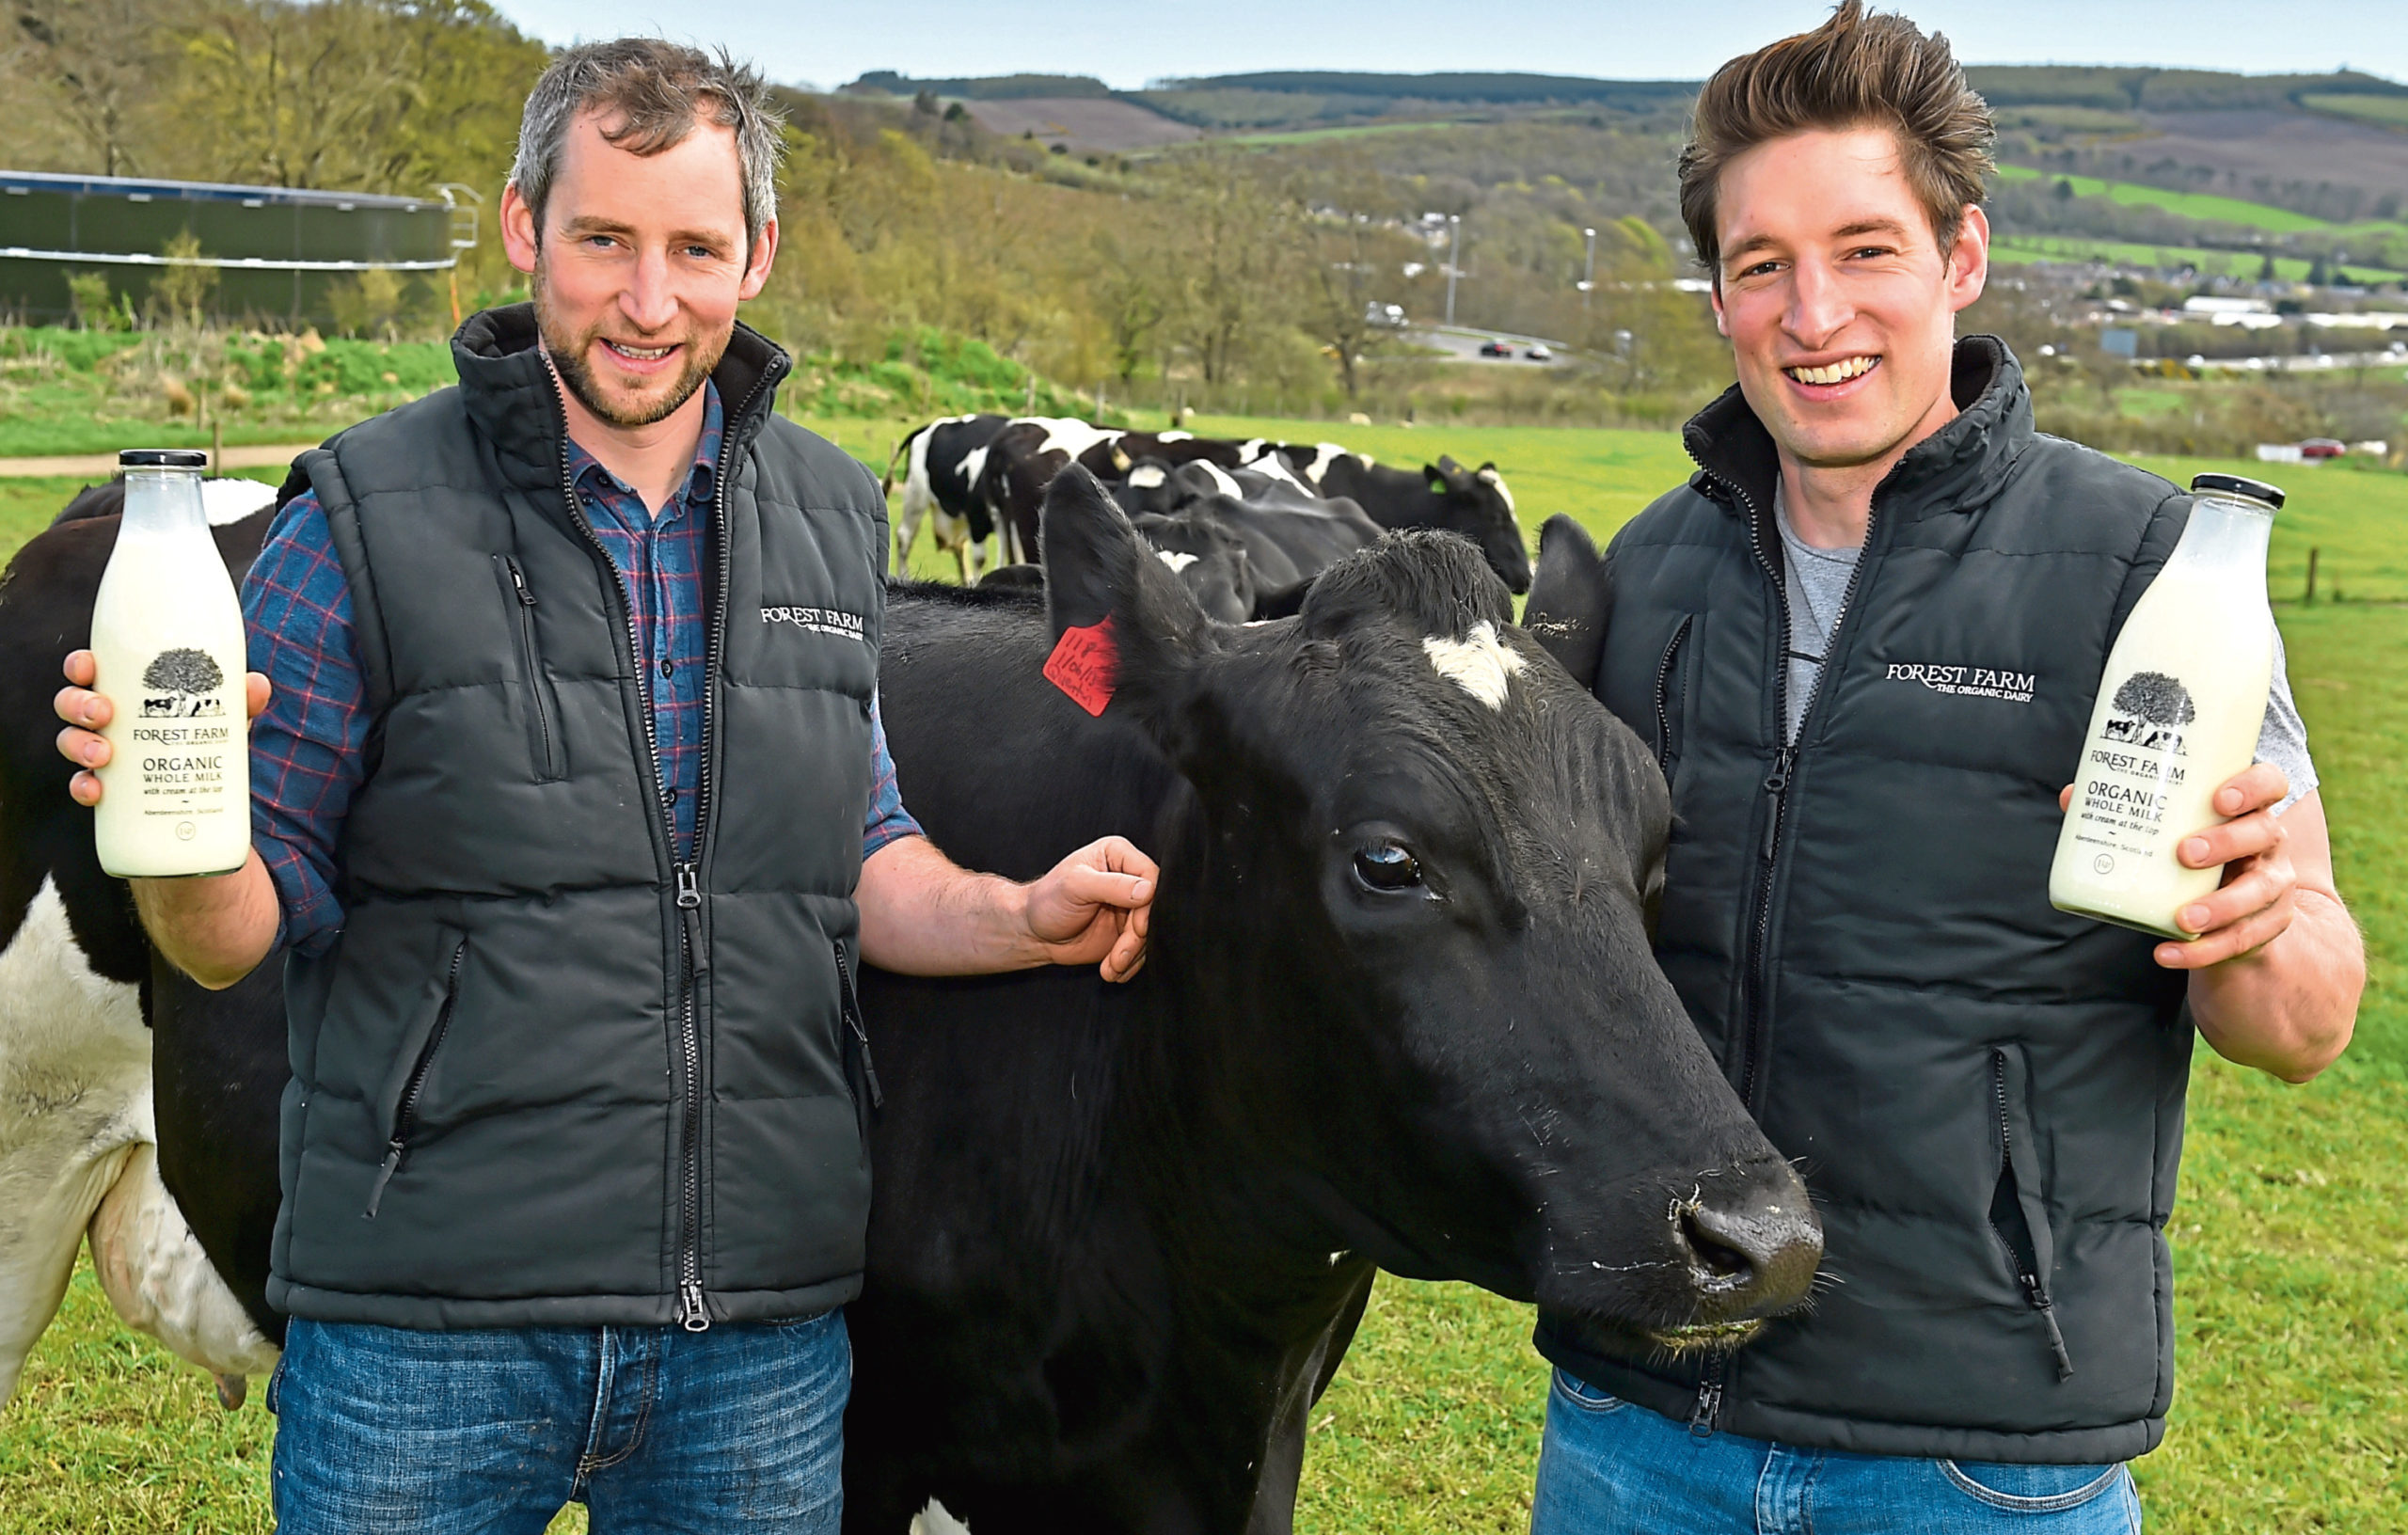 Brothers William (left) and Angus Willis from Forest Farm Dairy, which has received support in the latest round of funding.